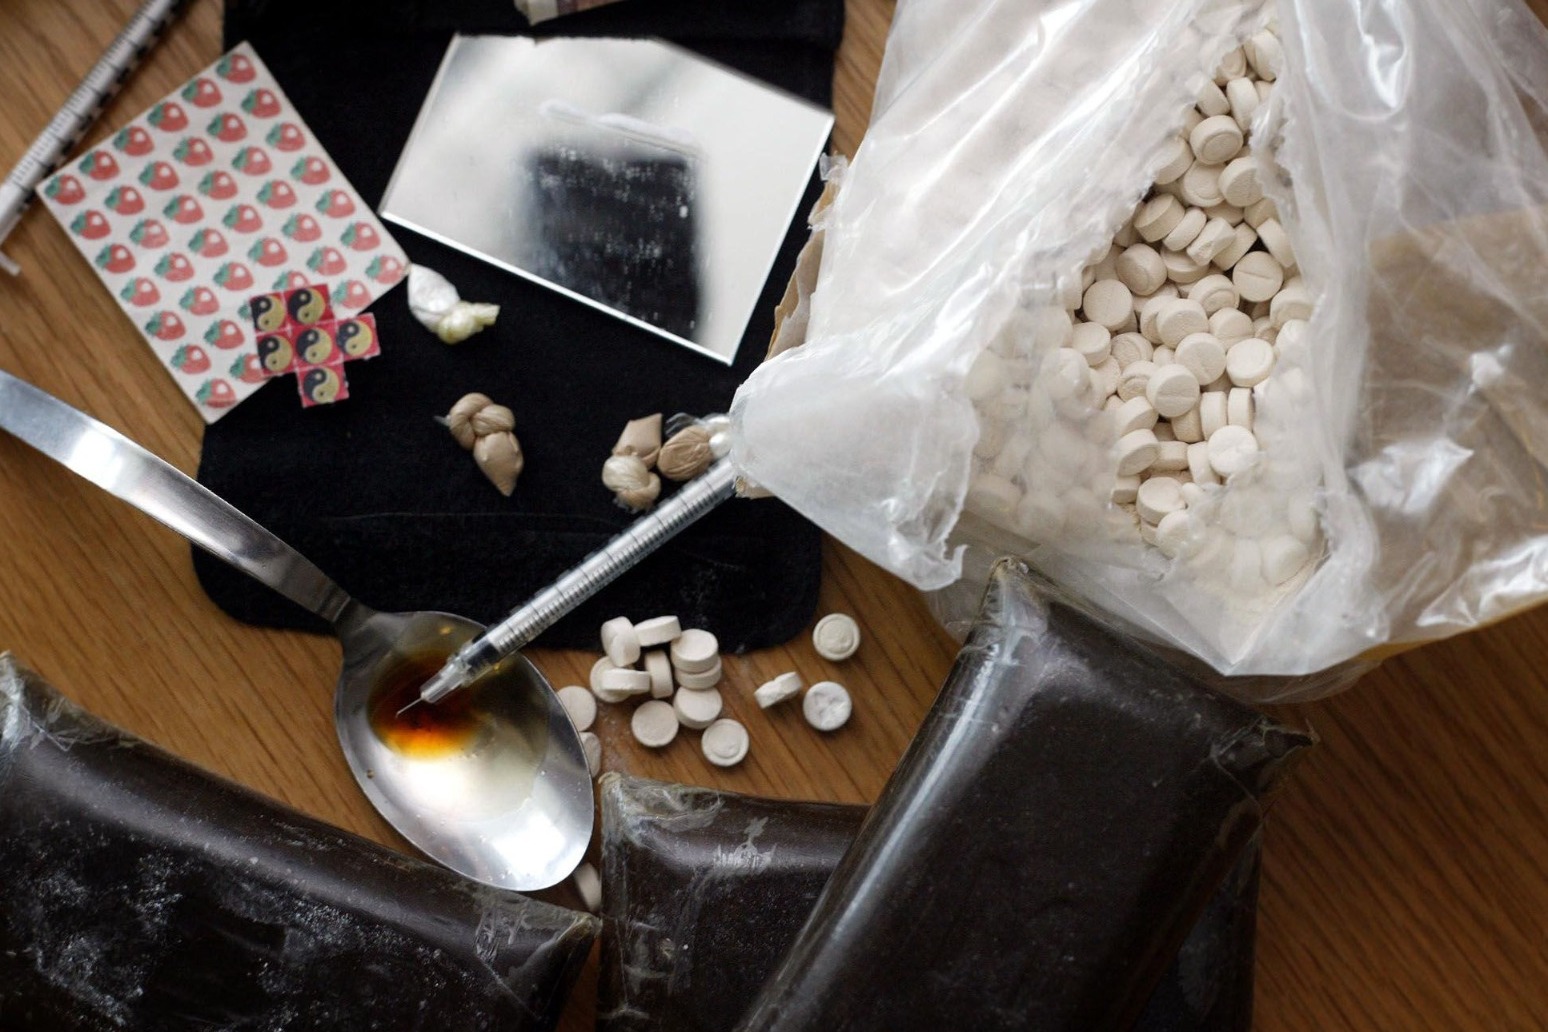 Illegal drugs flowing into UK despite attempts to halt supply, report finds 